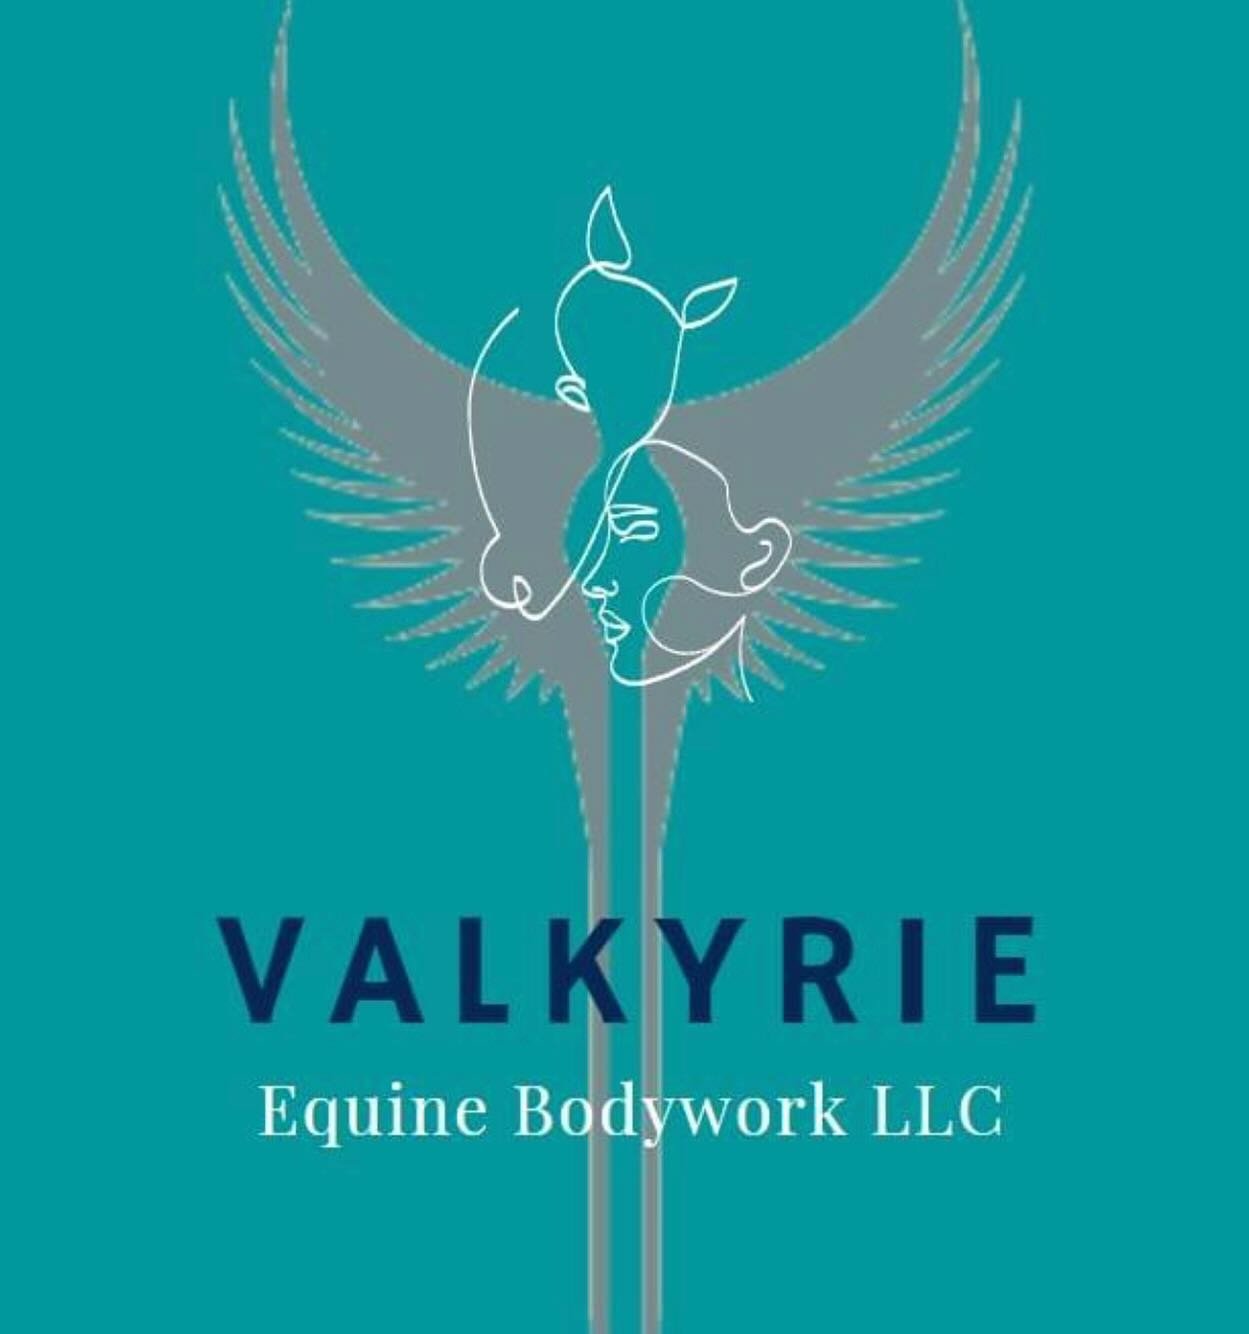 My Instagram for Valkyrie Equine Bodywork is officially live! Please follow my page for news and updates (like becoming MMCP certified)!